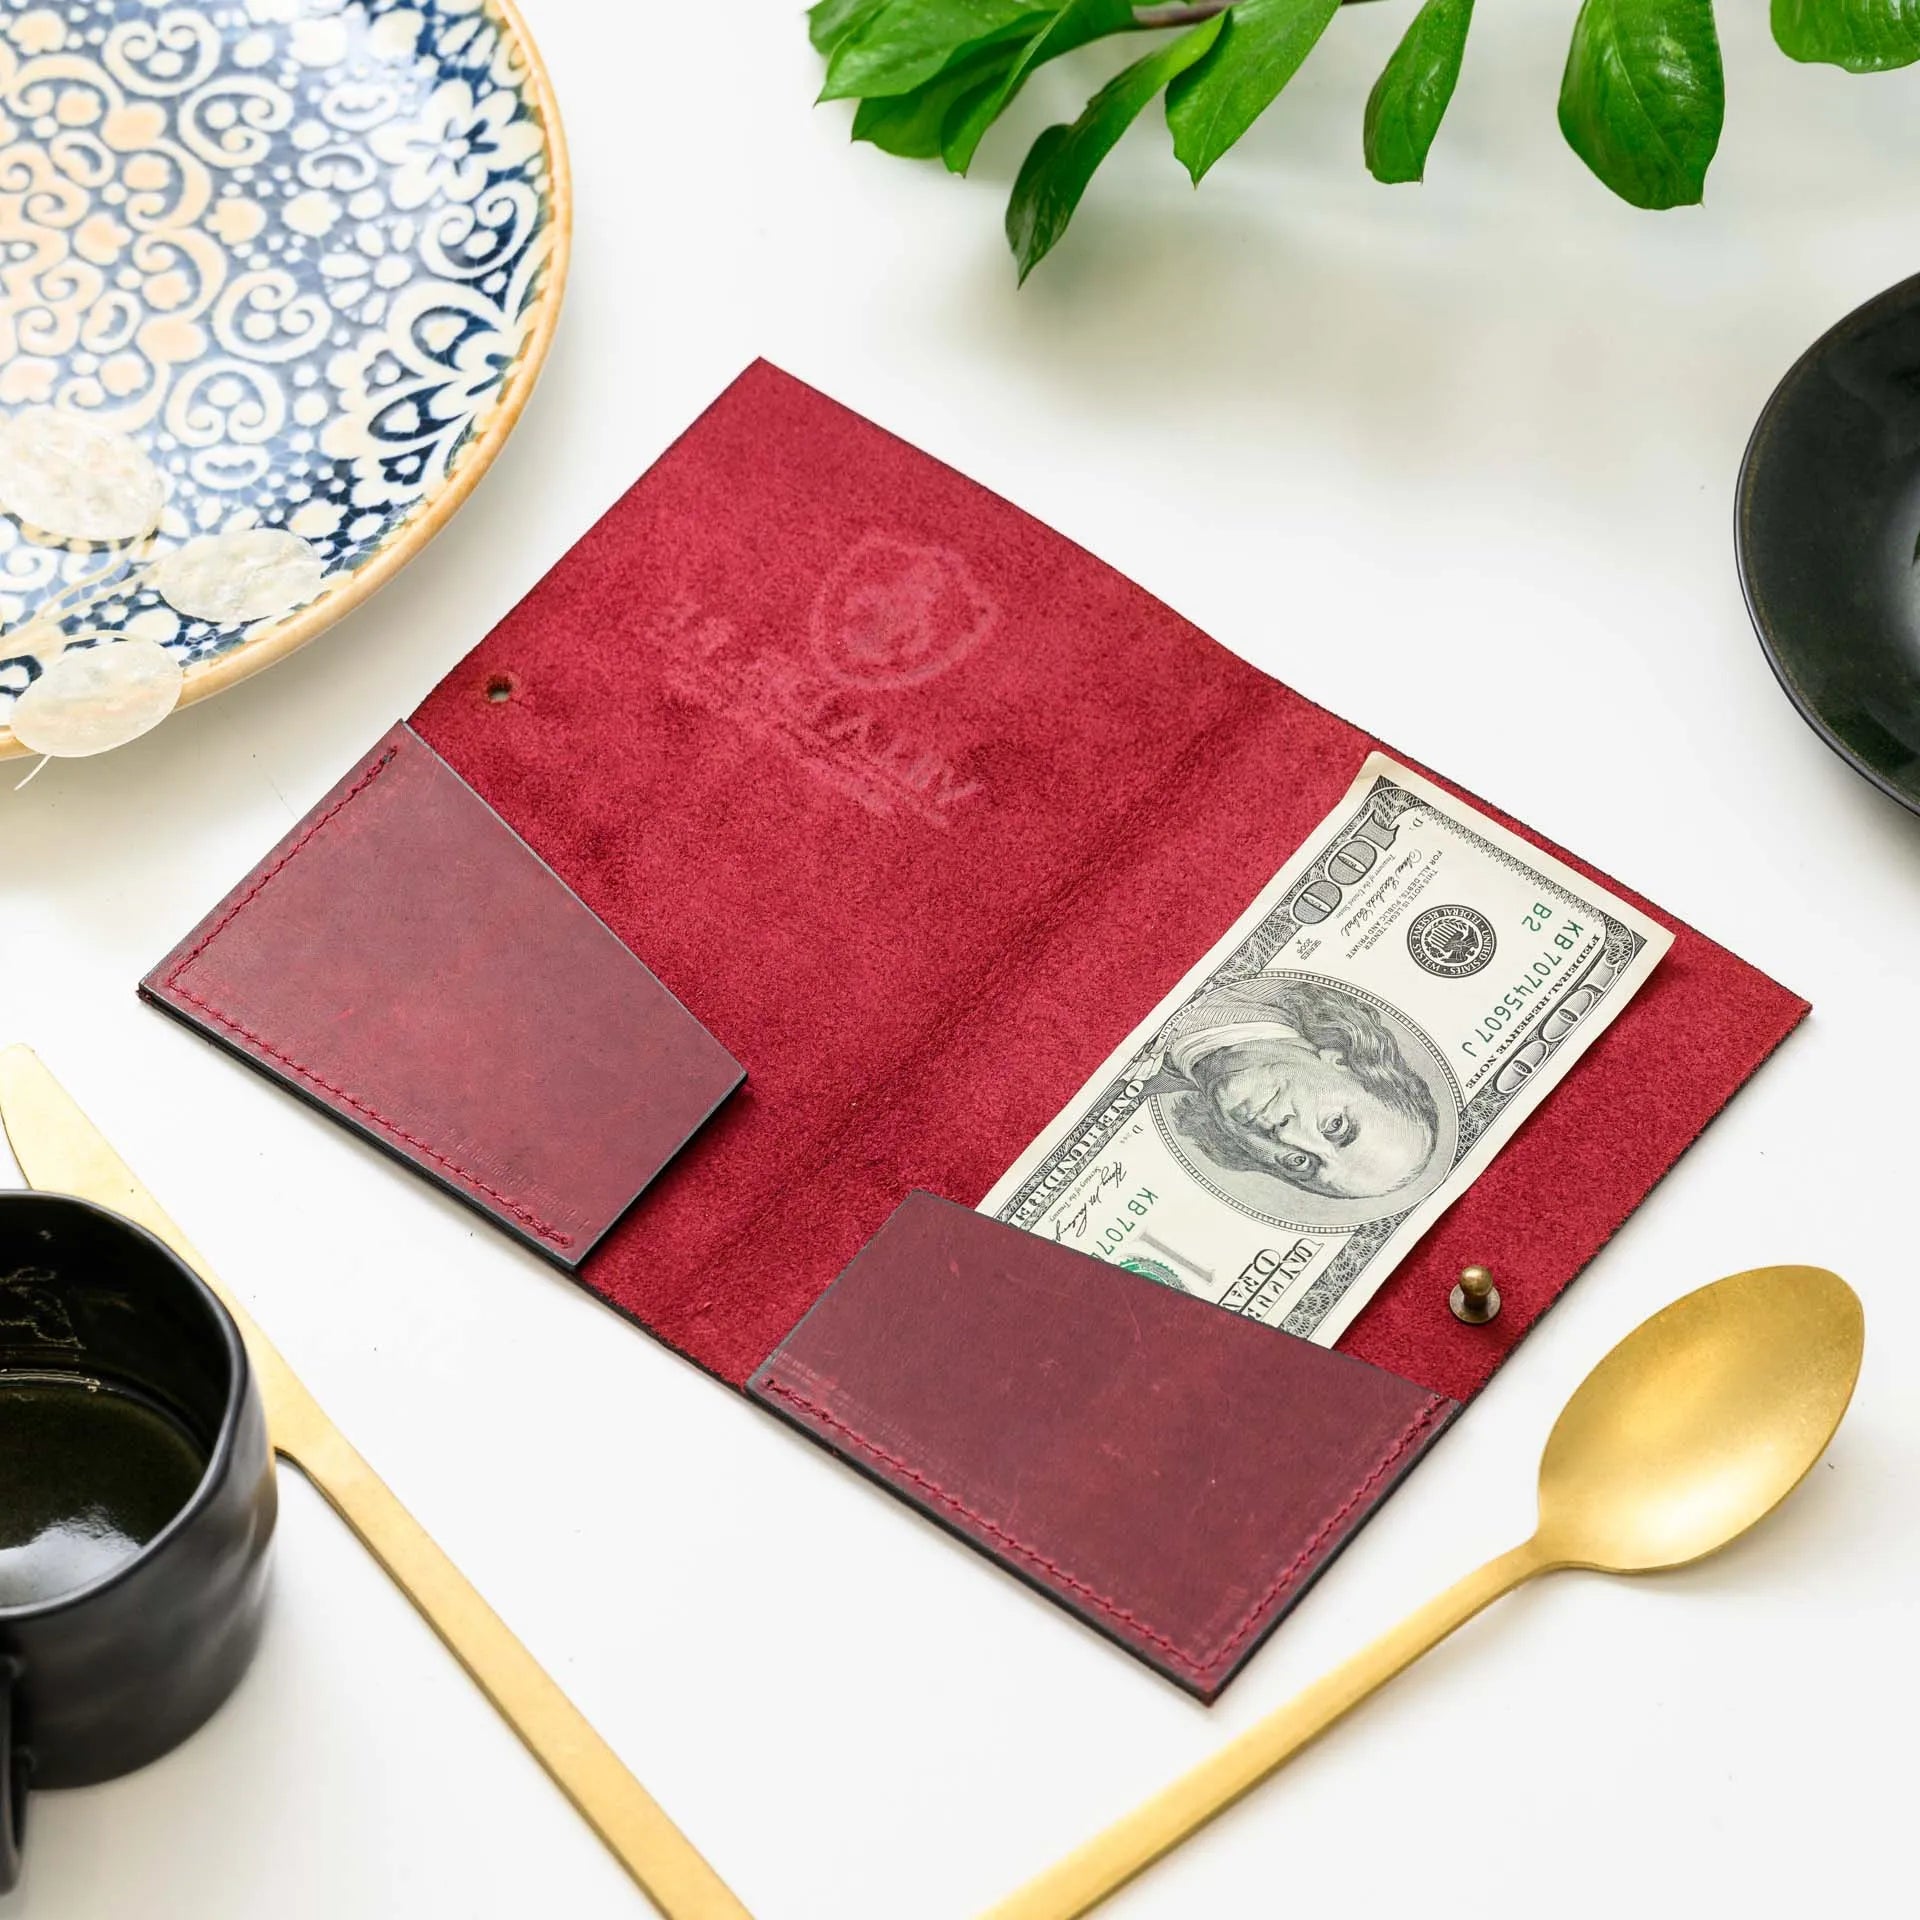 Durable Bill Holder: Ensure longevity with our durable leather bill holder built for everyday use.